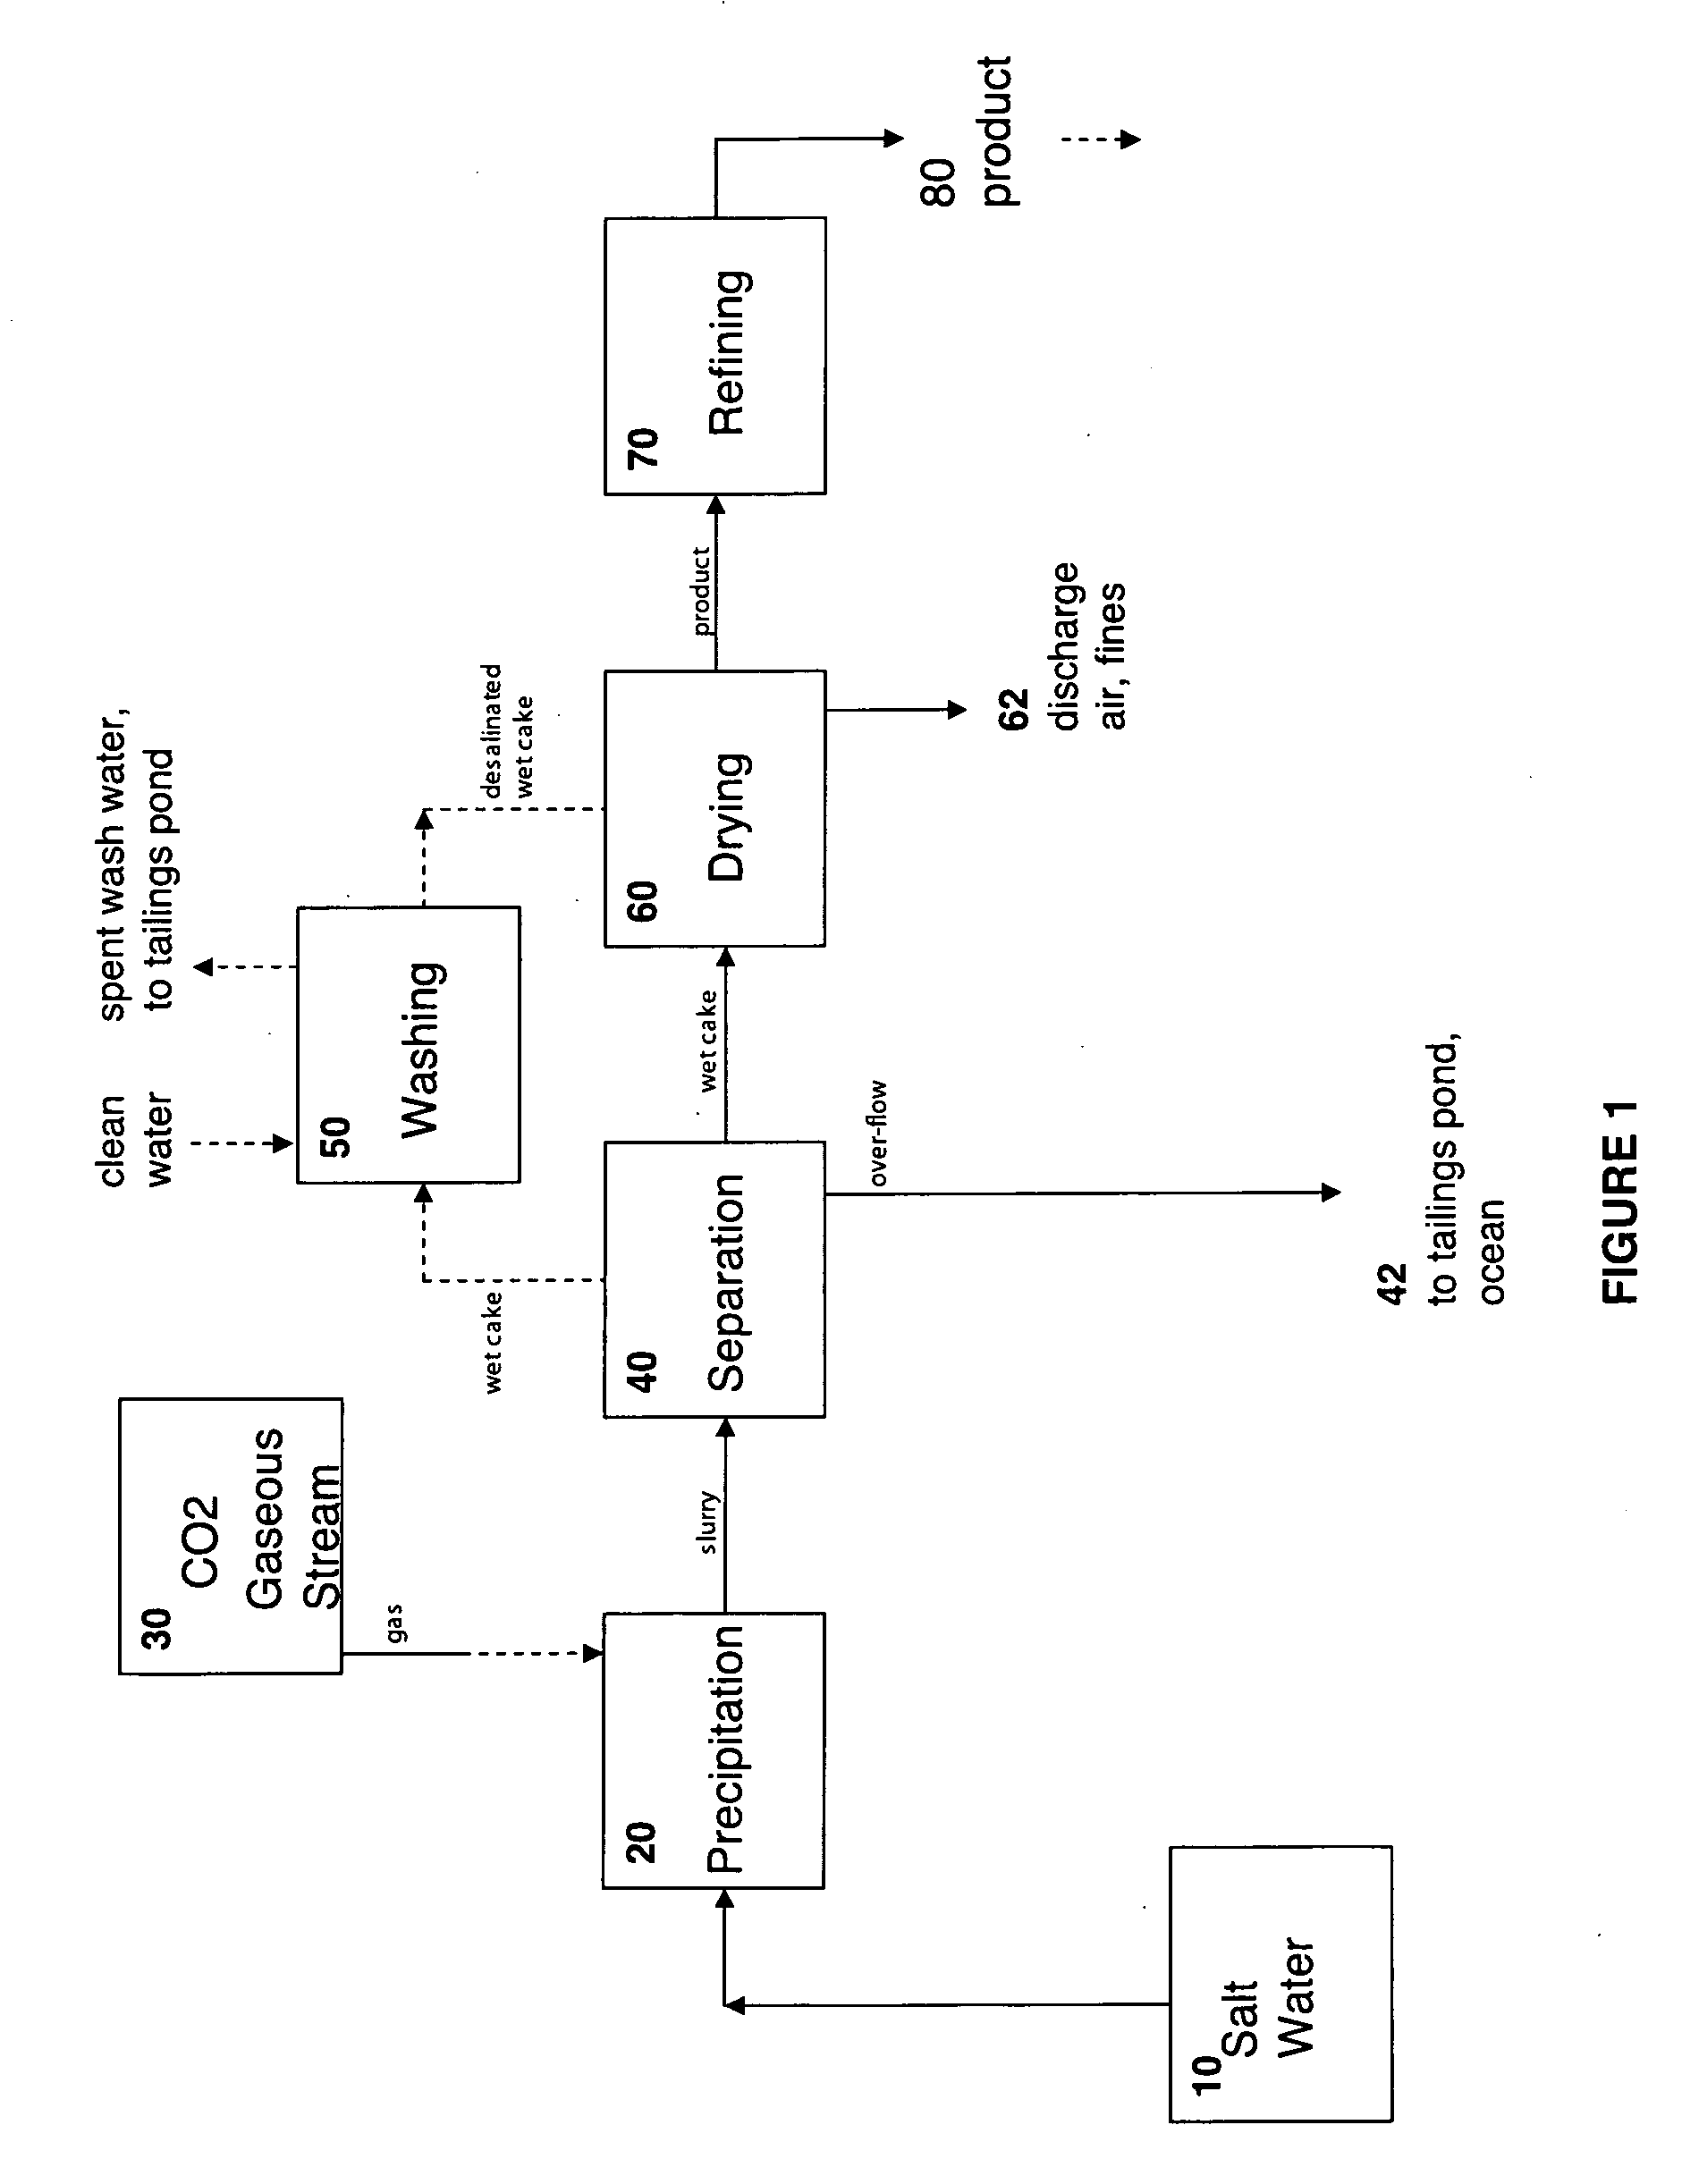 Hydraulic cements comprising carbonate compound compositions